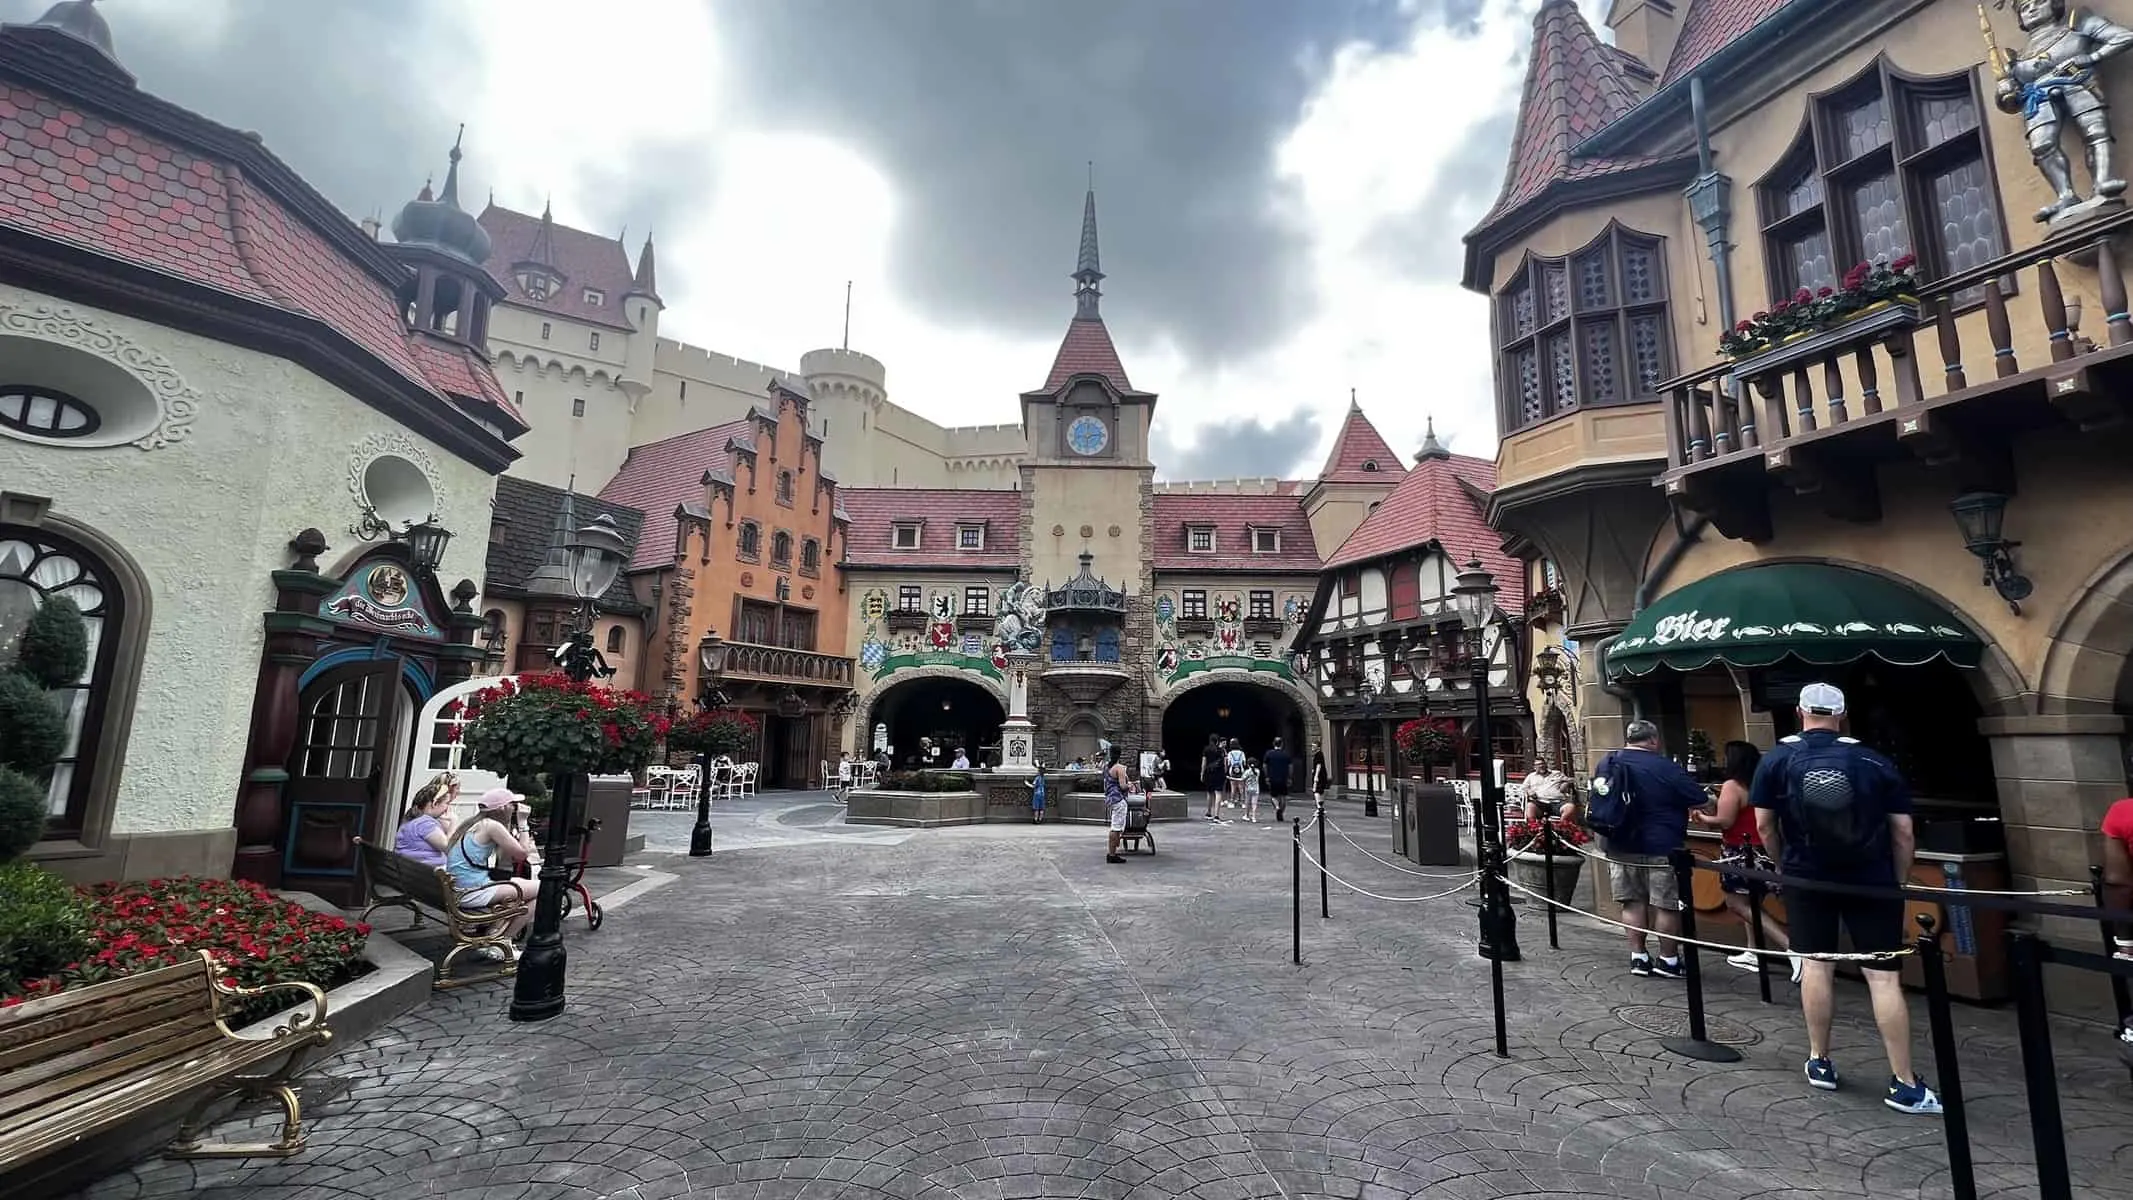 A deep dive into the Germany pavilion at Epcot (snacks, beer, best fireworks views)